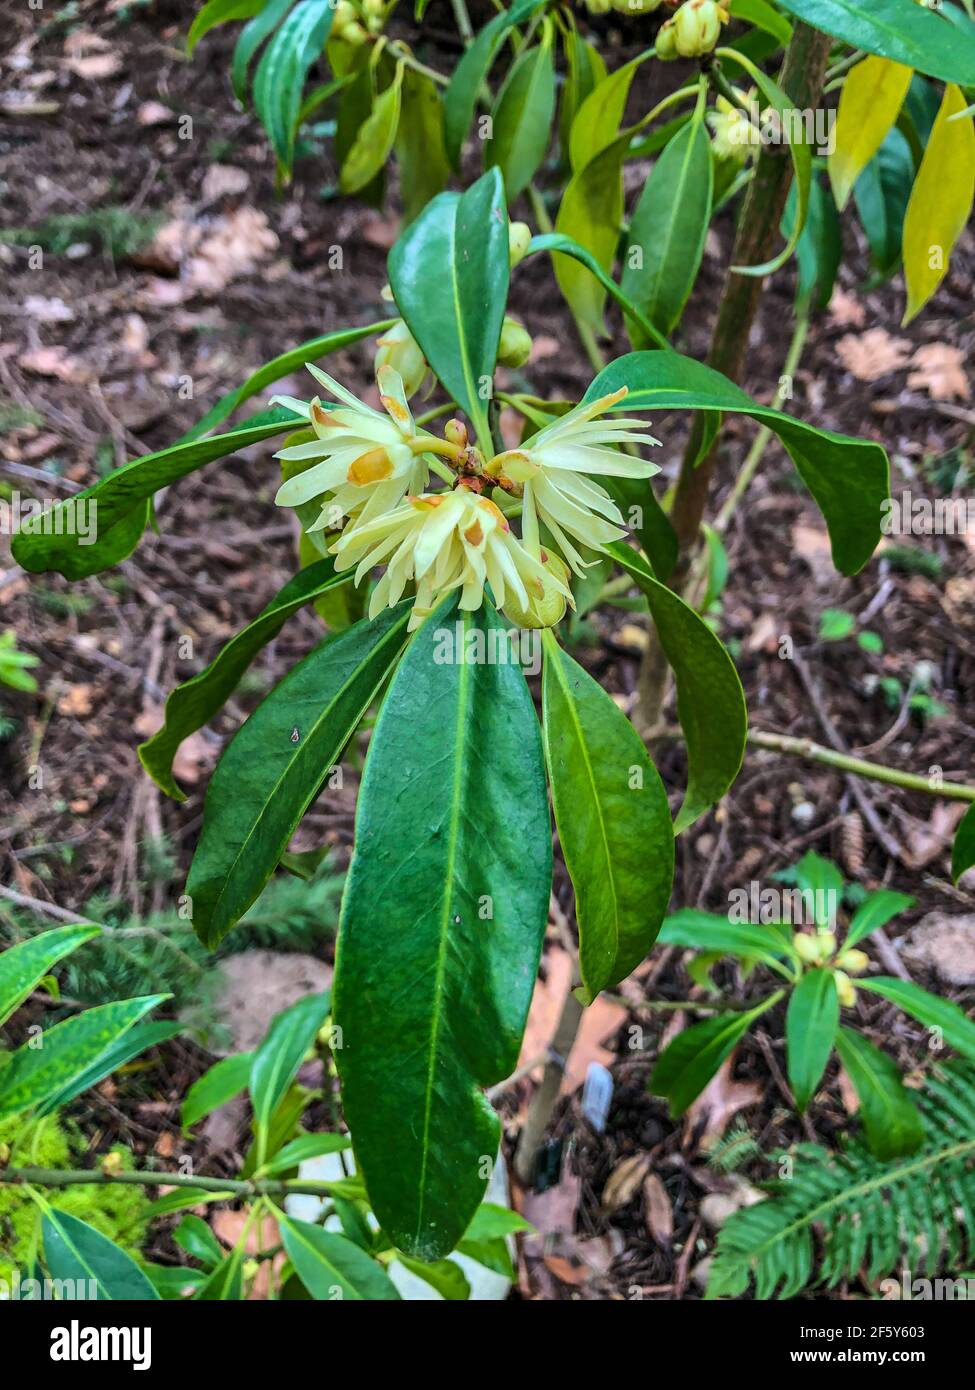 Illicium macranthum is a genus of flowering plants treated as part of the family Schisandraceae. Stock Photo